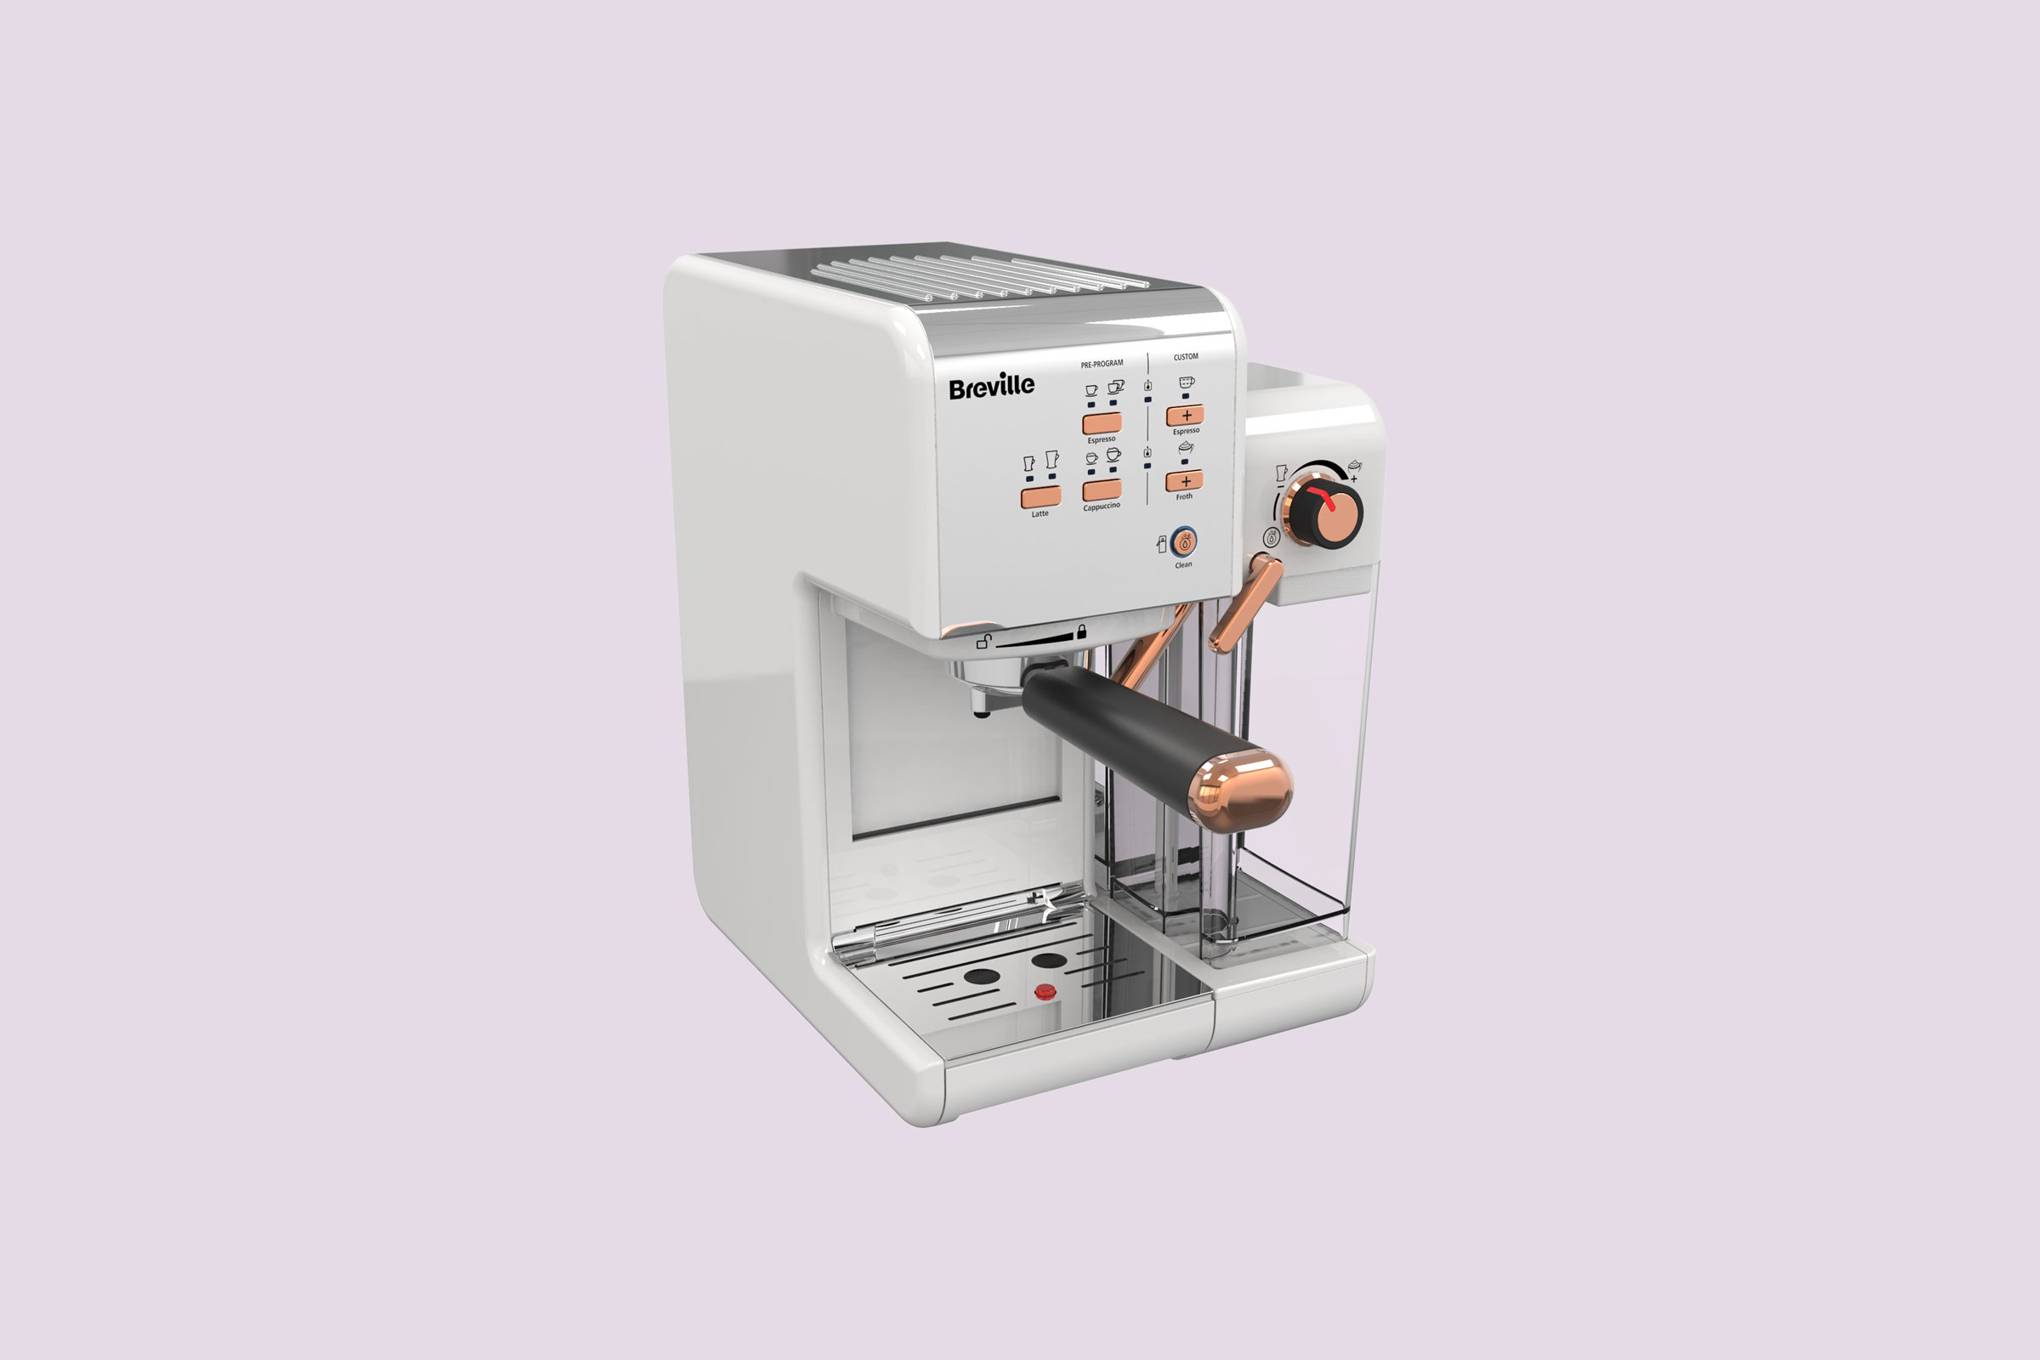 which coffee machine to buy for home